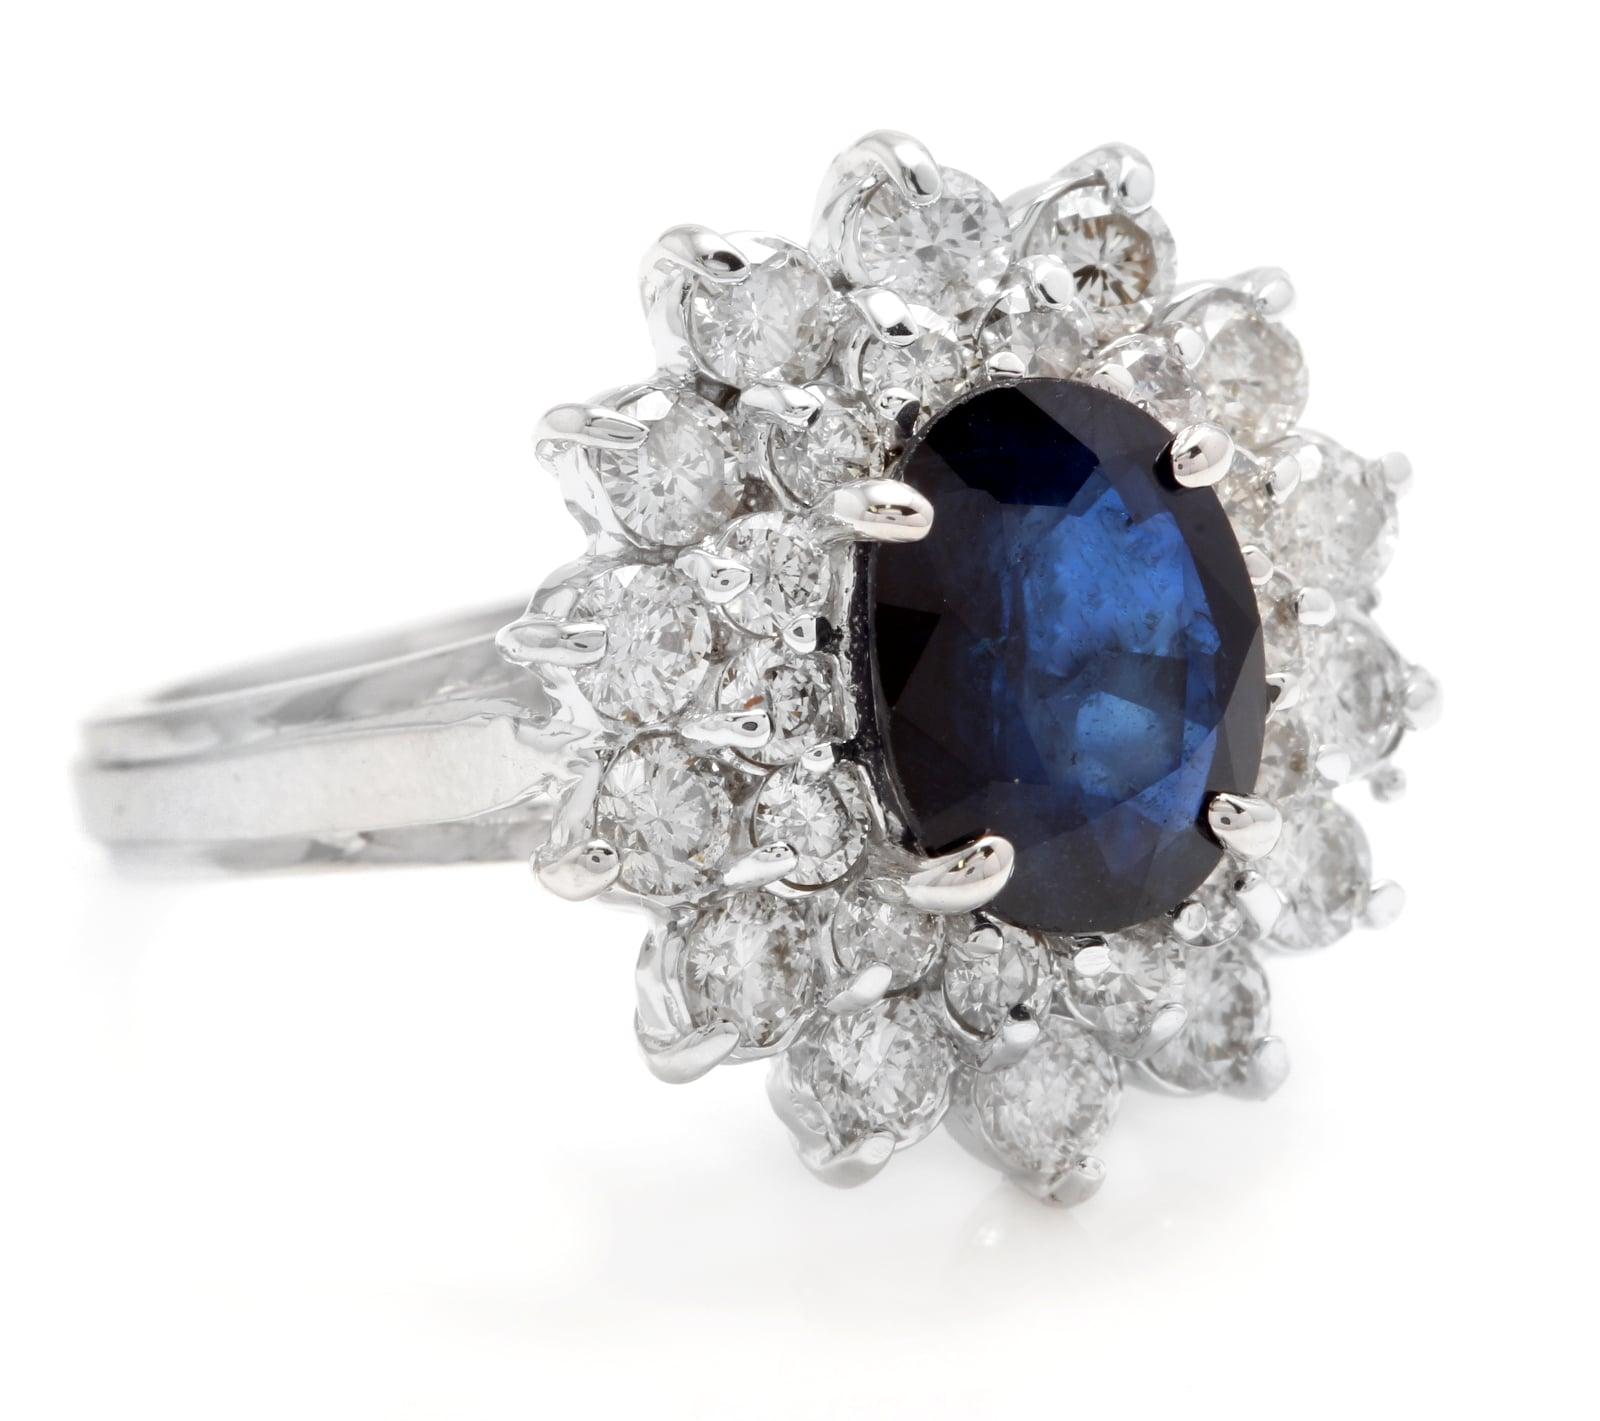 3.00 Carats Natural Blue Sapphire and Diamond 14K Solid White Gold Ring

Total Natural Blue Sapphire Weights: Approx. 1.70 Carats

Sapphire Measures: Approx. 8 x 6mm

Natural Round Diamonds Weight: Approx. 1.30 Carats (color G-H / Clarity